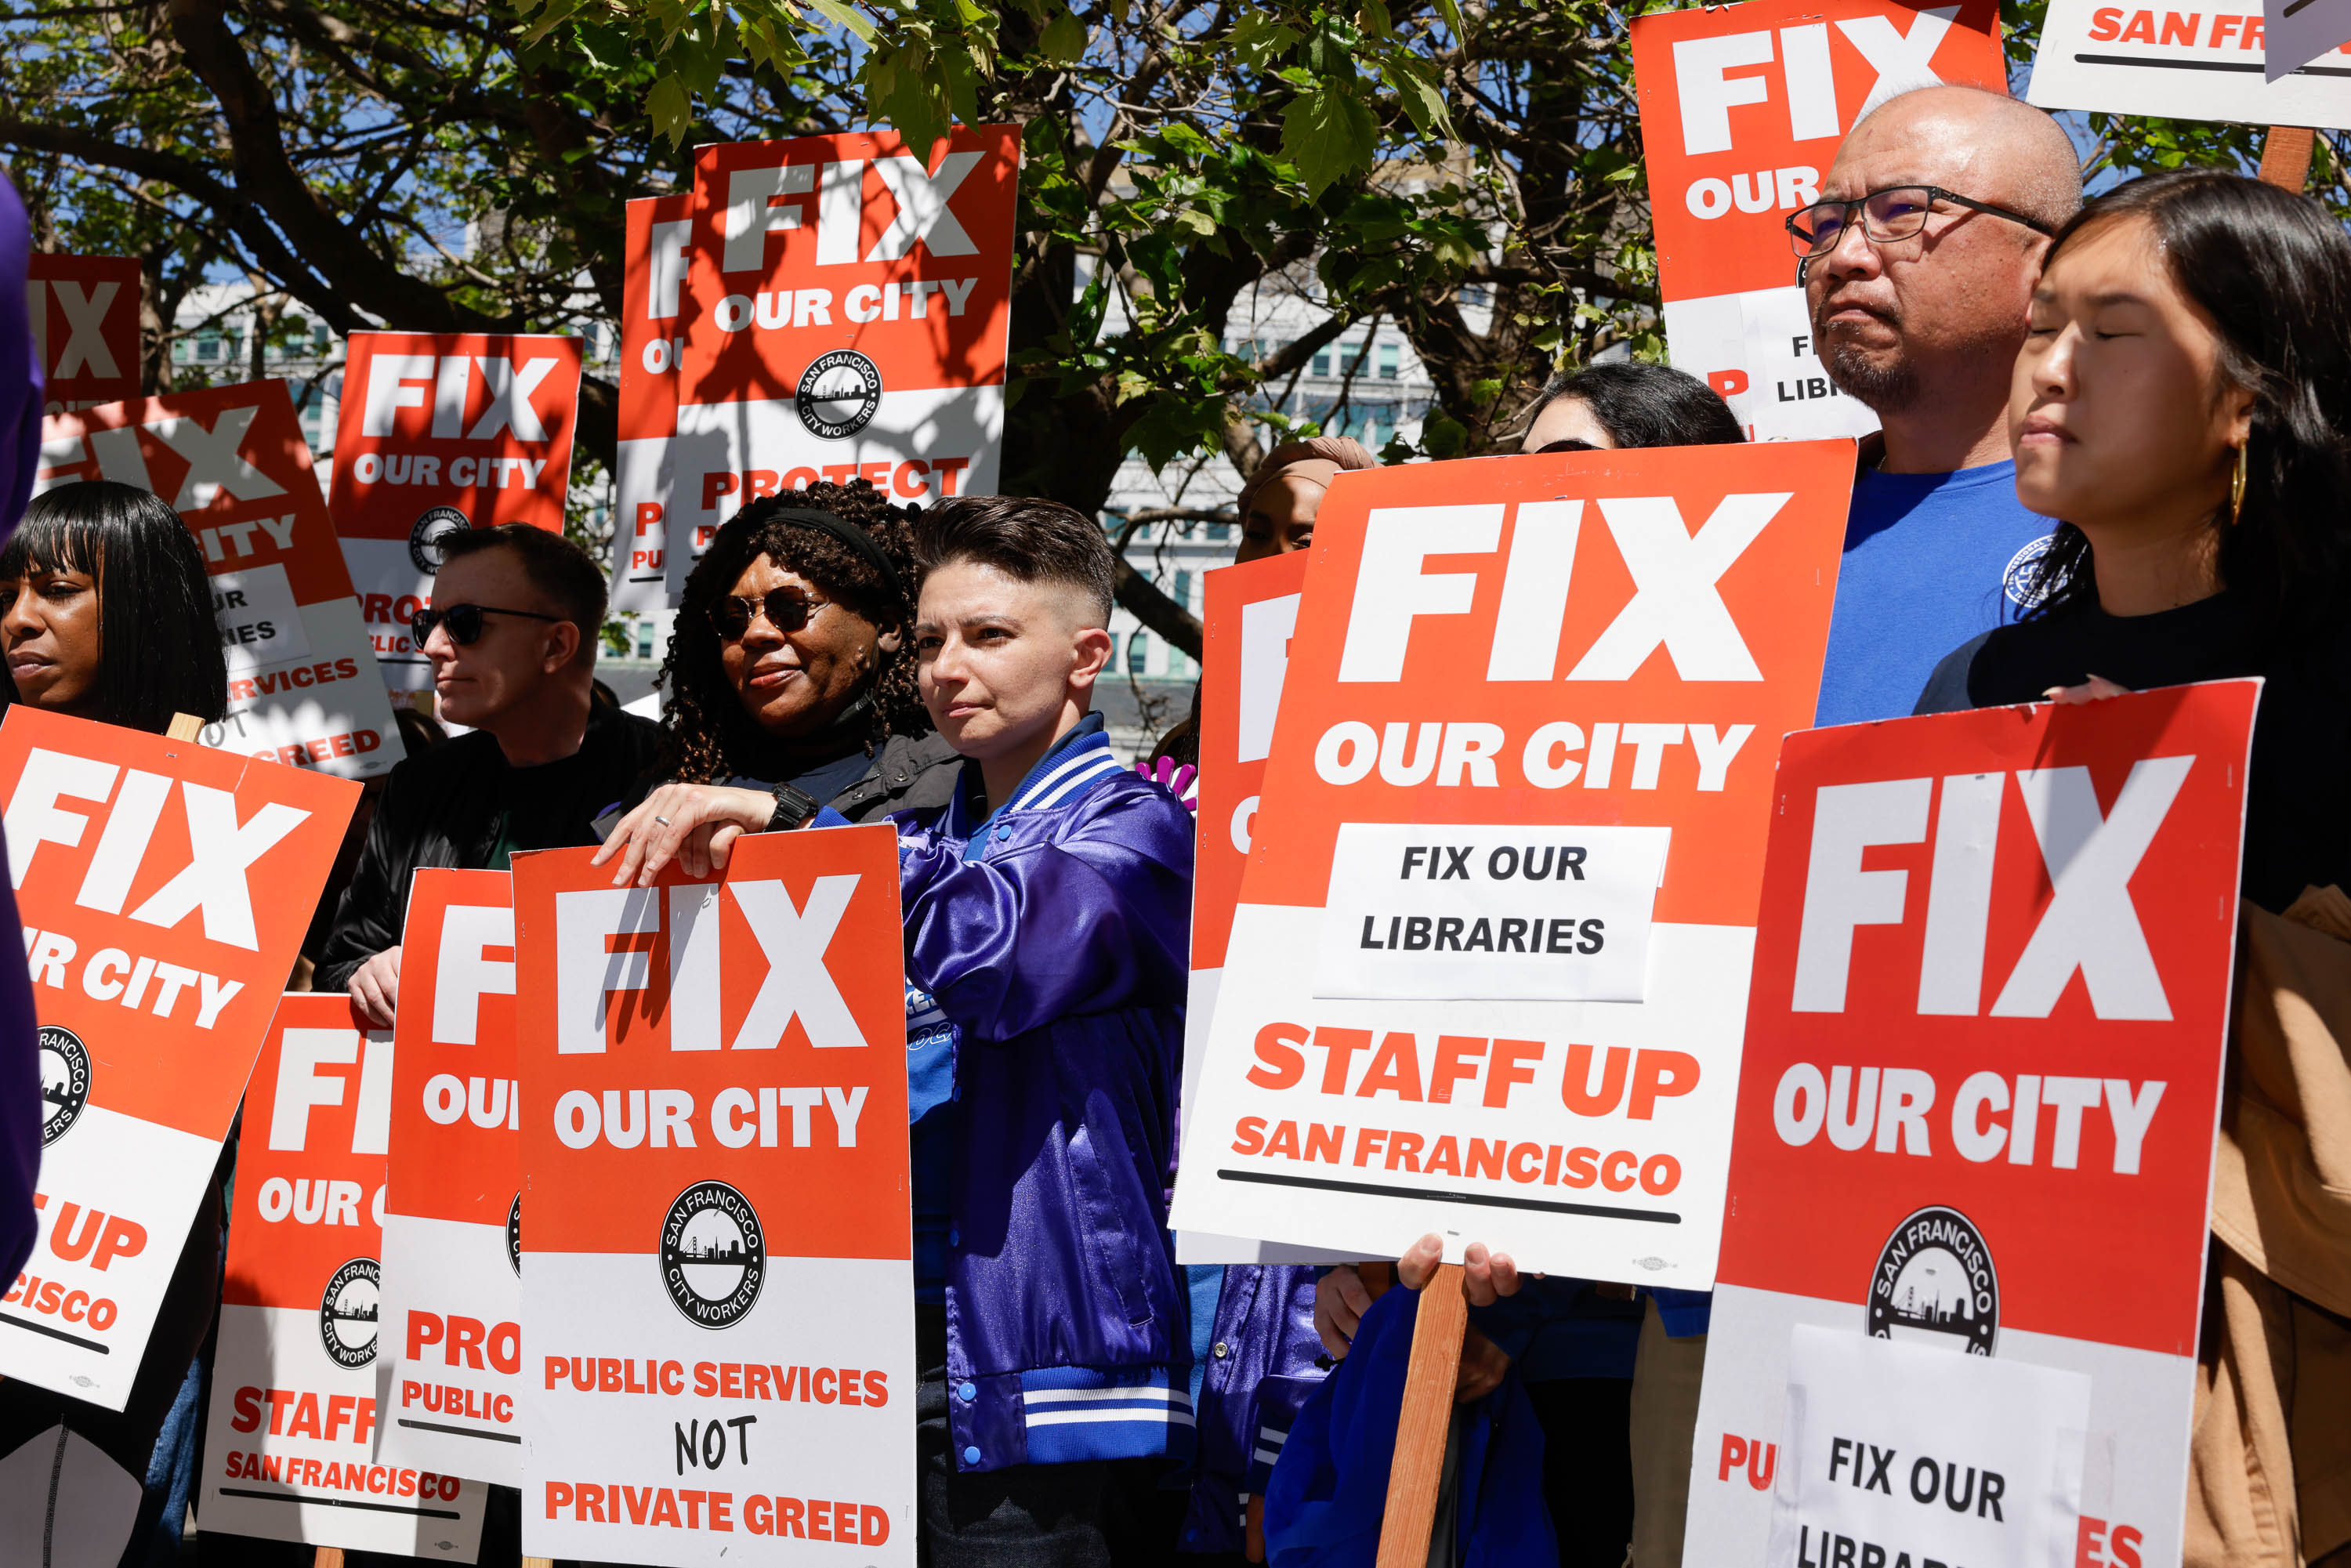 People holding &quot;FIX OUR CITY&quot; signs at a public demonstration.